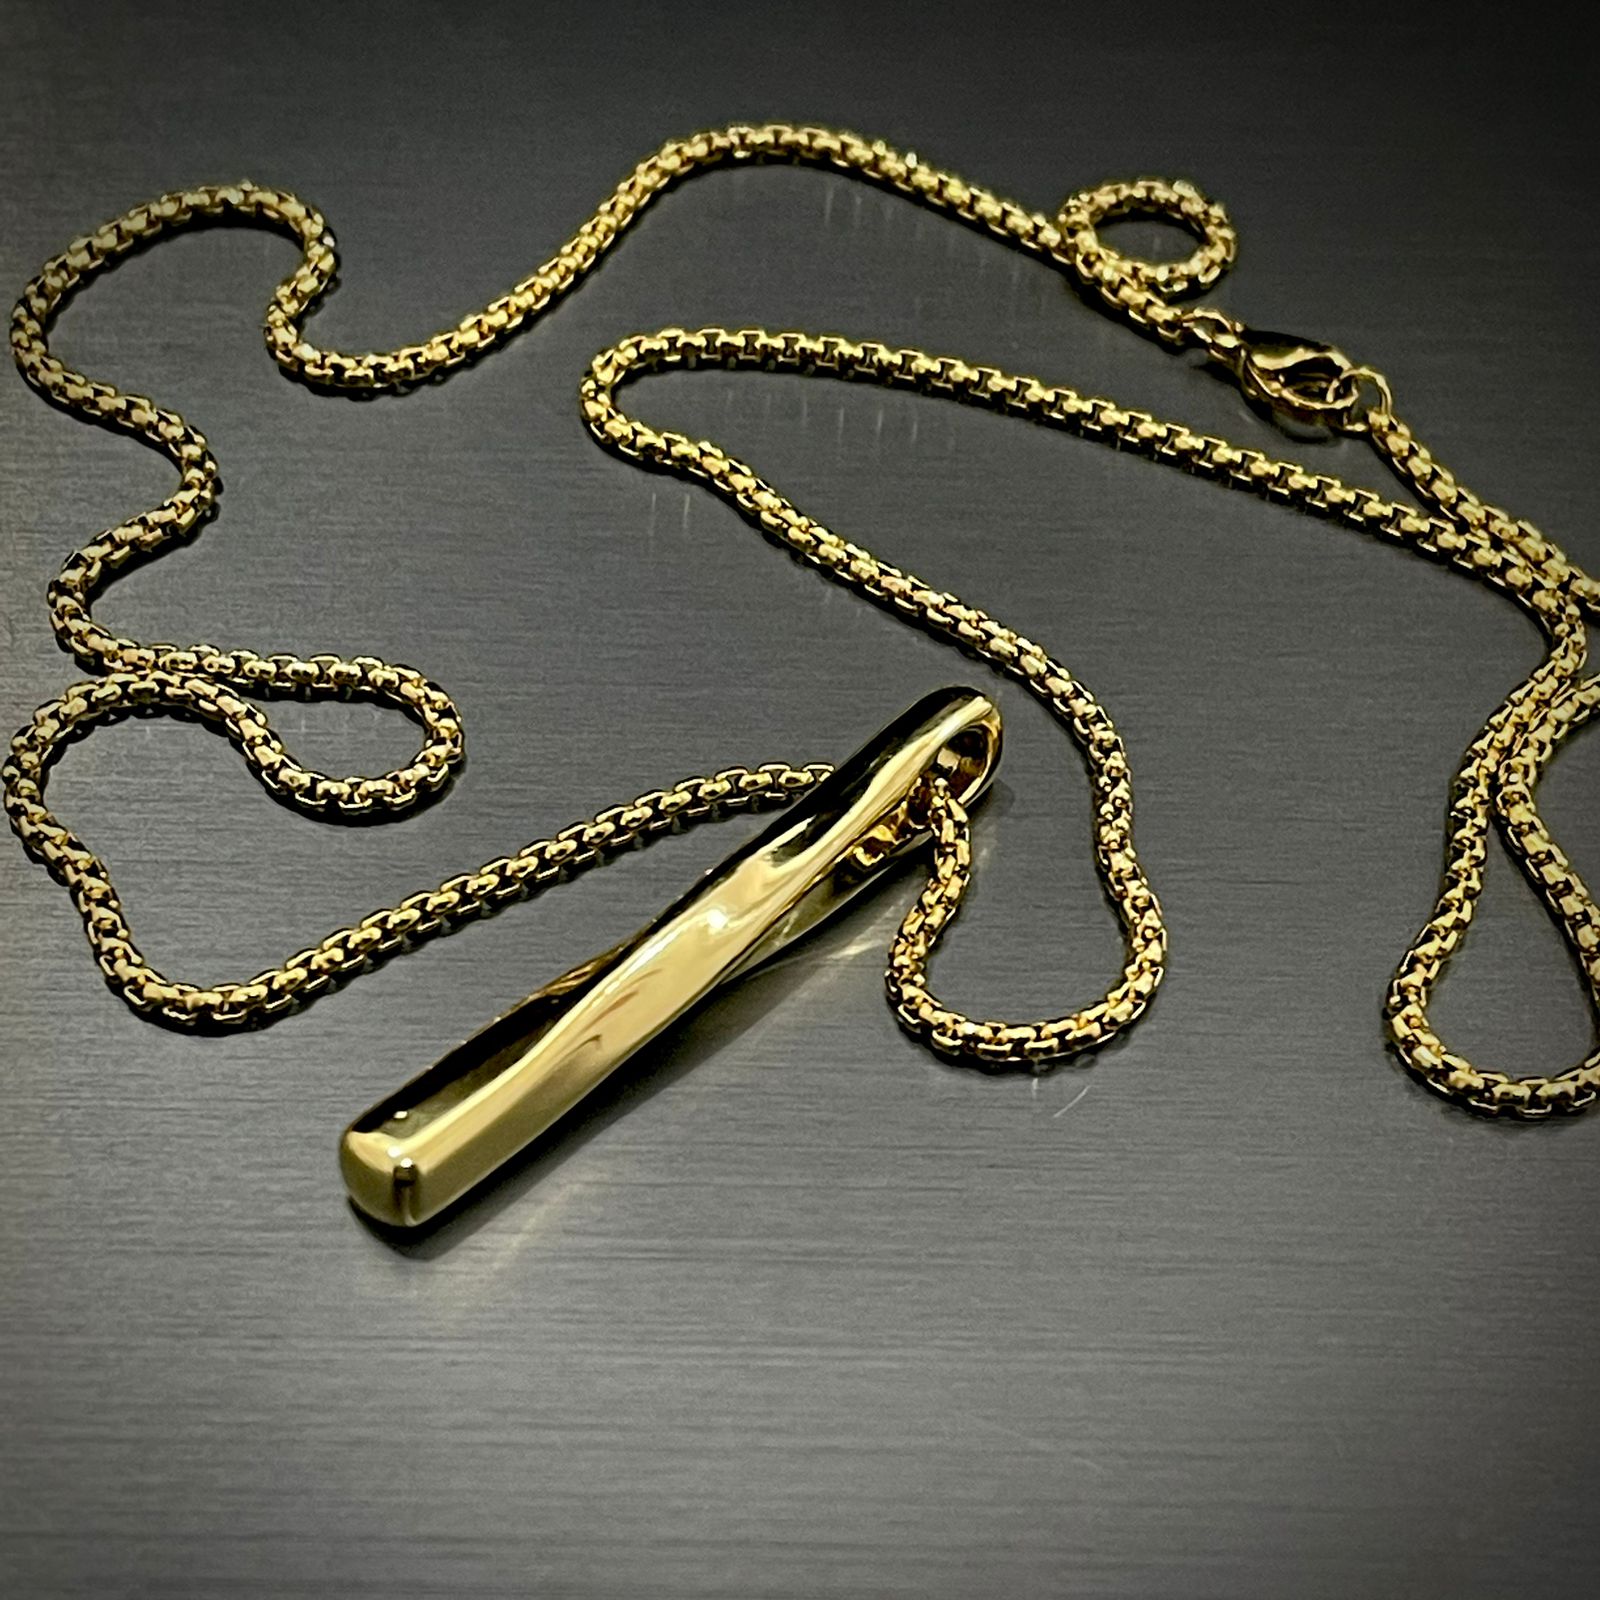 Golden Bar Locket with chain For Boys In Pakistan